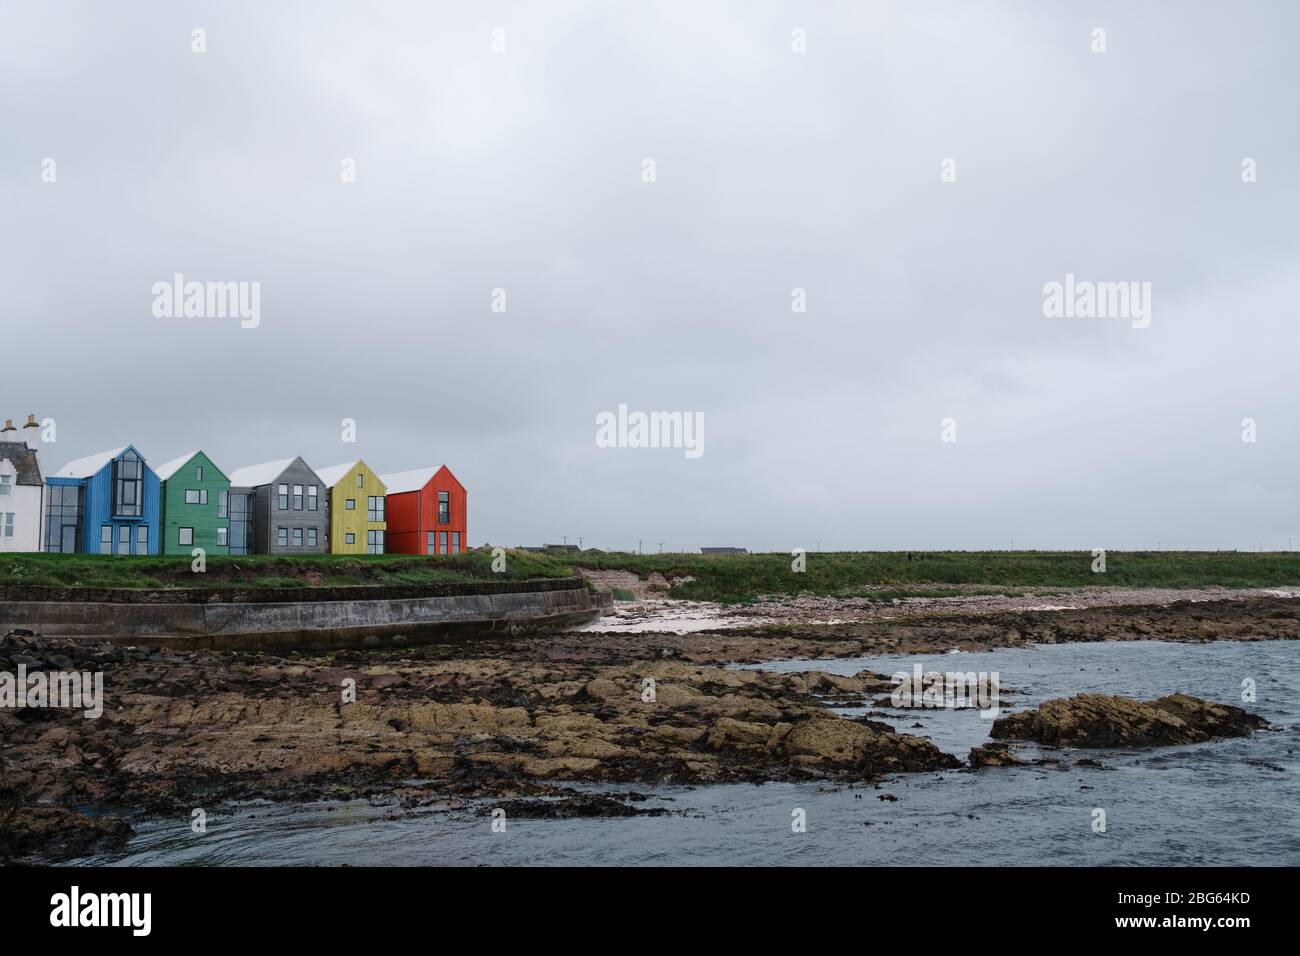 The Inn at John O' Groats, which has been recently extended with these colourful norse style houses which suit the location. Stock Photo